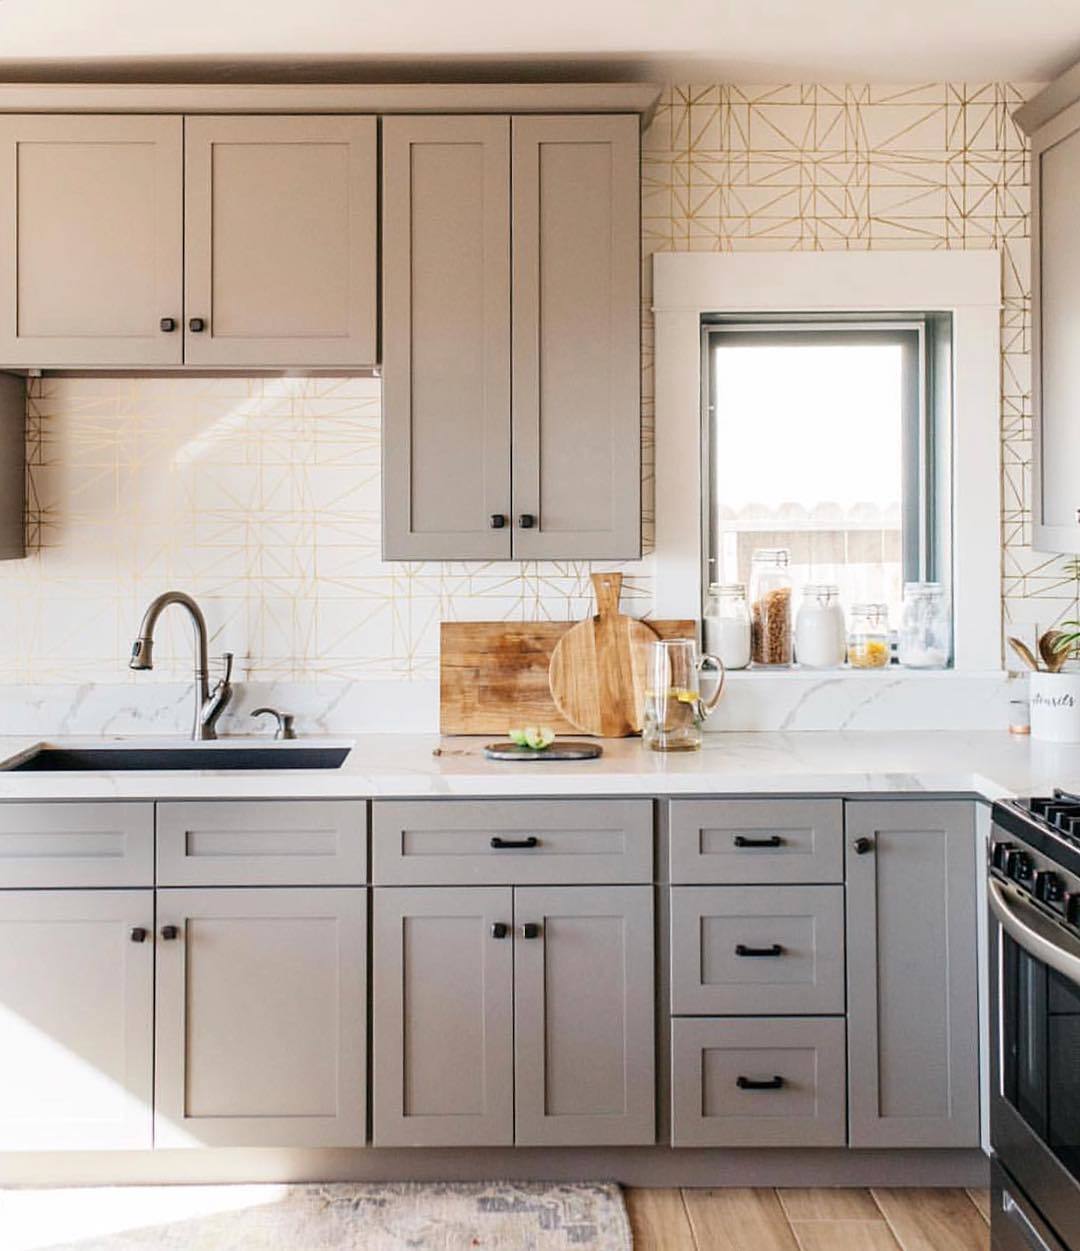 Our Favorite Patterns for the Kitchen | Strike Gold wallpaper | Heath Ceramics | Hygge & West